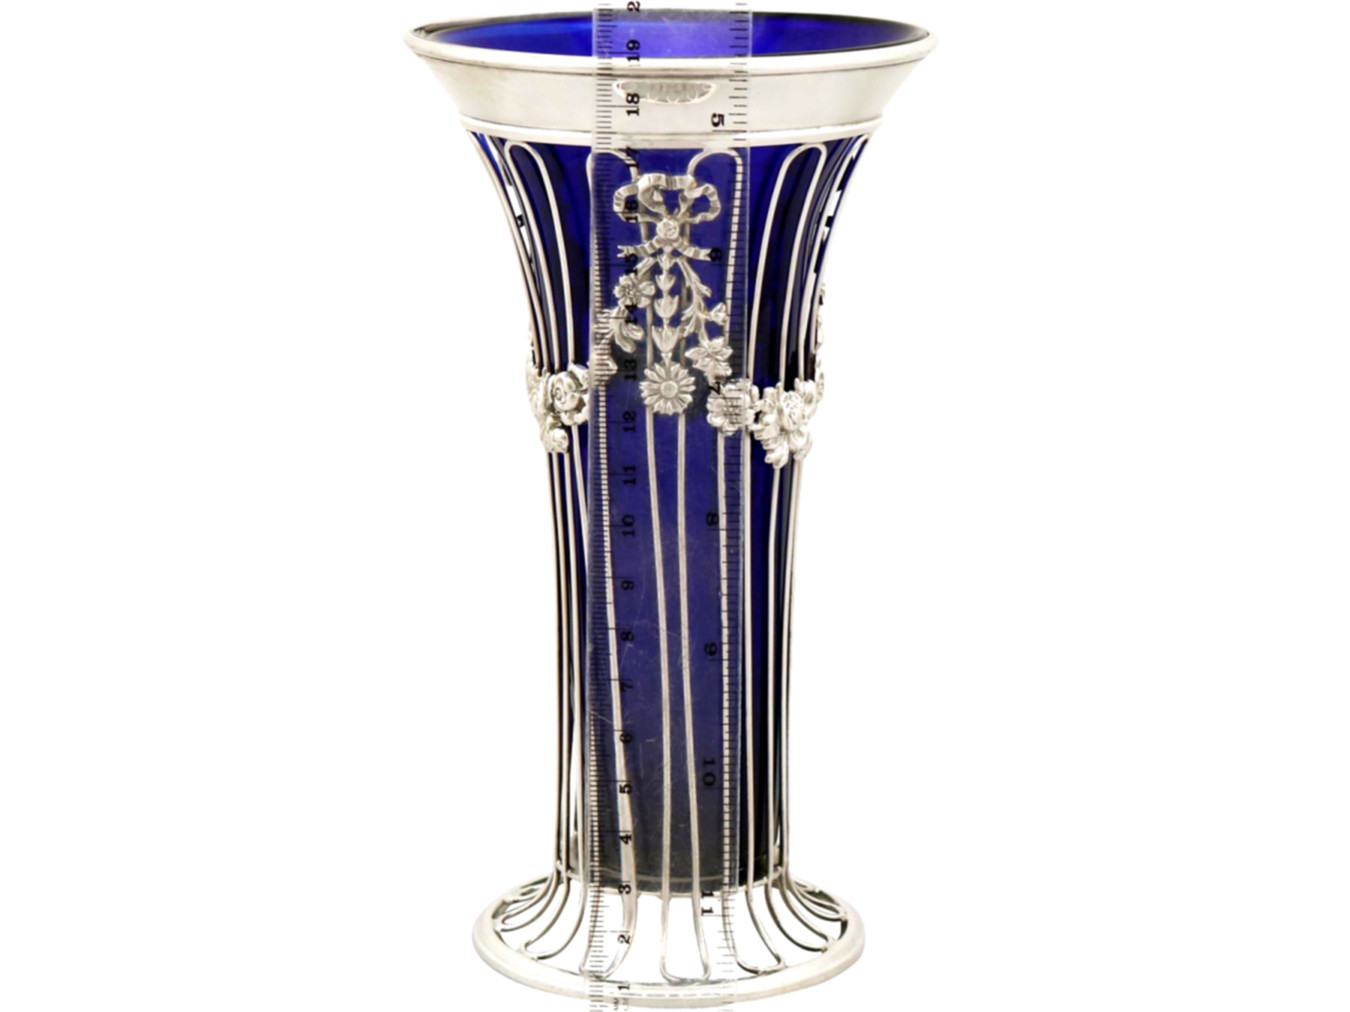 25 Awesome Round Silver Vase 2024 free download round silver vase of the biggest contribution of silver glass vase to humanity silver pertaining to 1904 antique edwardian sterling silver and glass vase for sale at